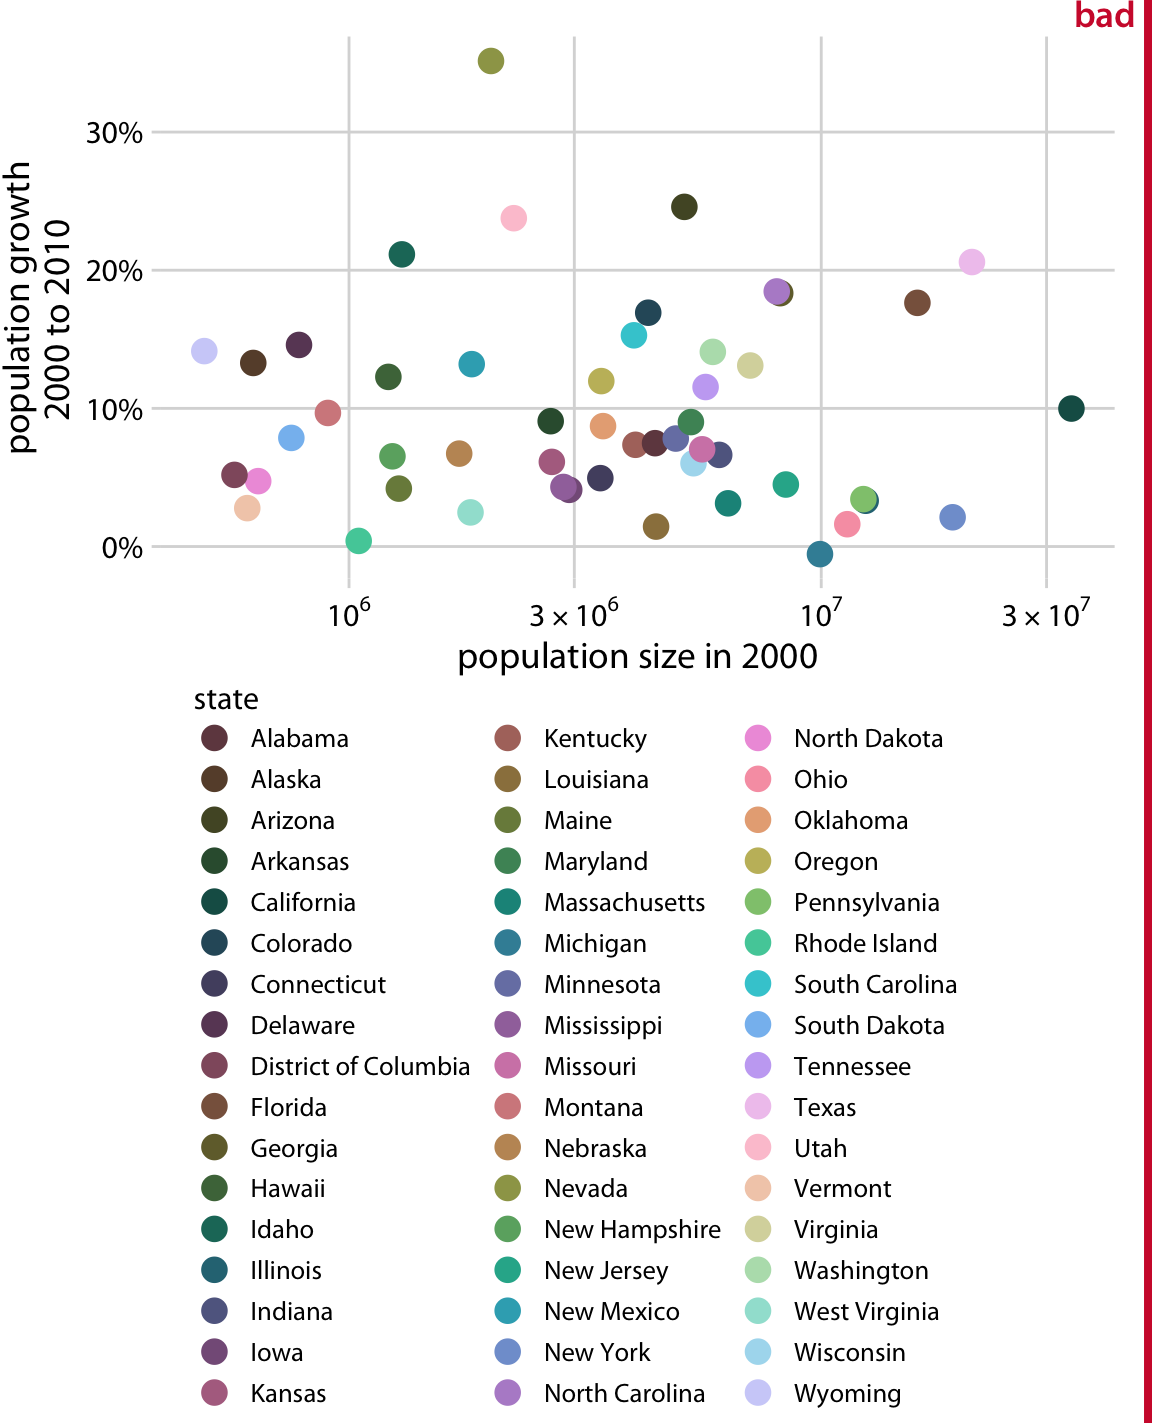 Population growth from 2000 to 2010 versus population size in 2000, for all 50 U.S. states and the Discrict of Columbia. Every state is marked in a different color. Because there are so many states, it is very difficult to match the colors in the legend to the dots in the scatter plot. Data source: U.S. Census Bureau